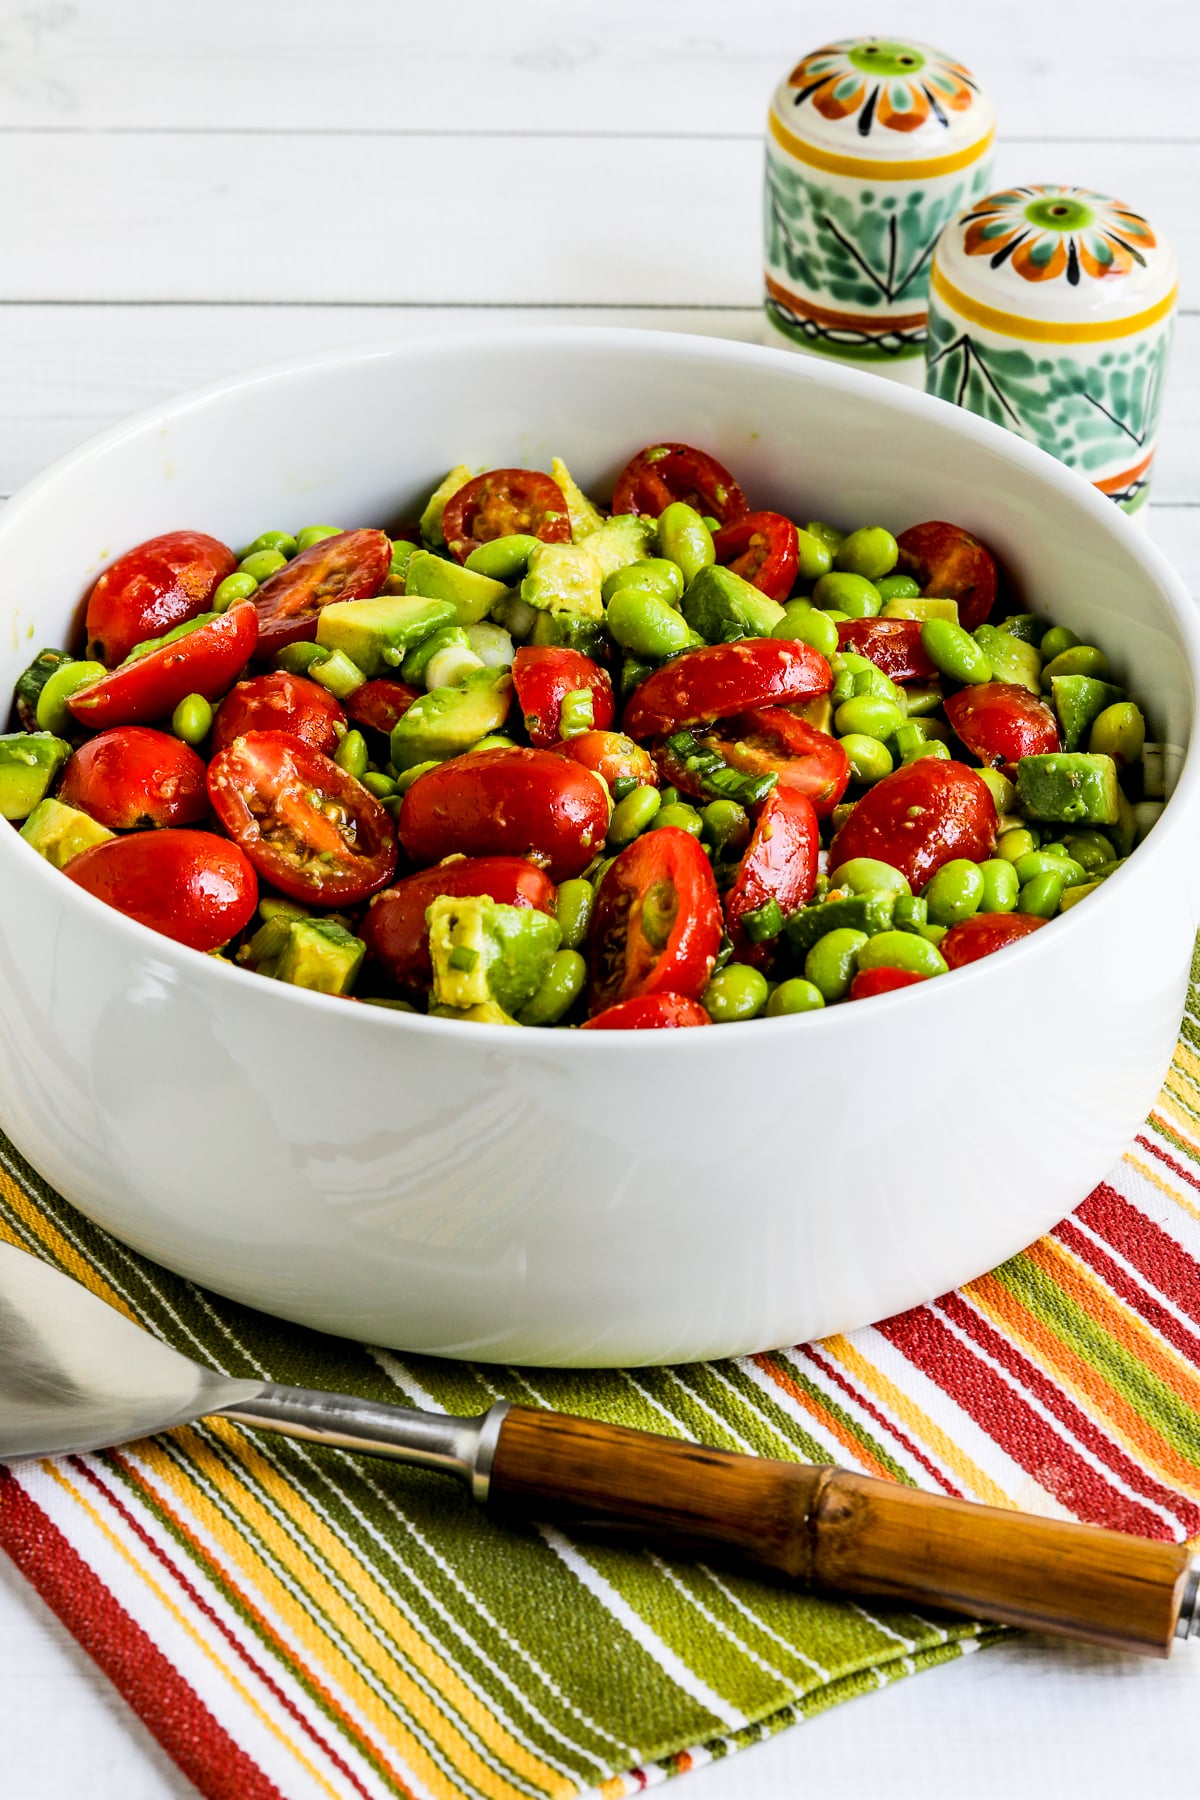 Tomato Salad with Avocado and Edamame in a Serving Bowl With Striped Napkin, Serving Fork, and Mexican Salt and Pepper Shakers.